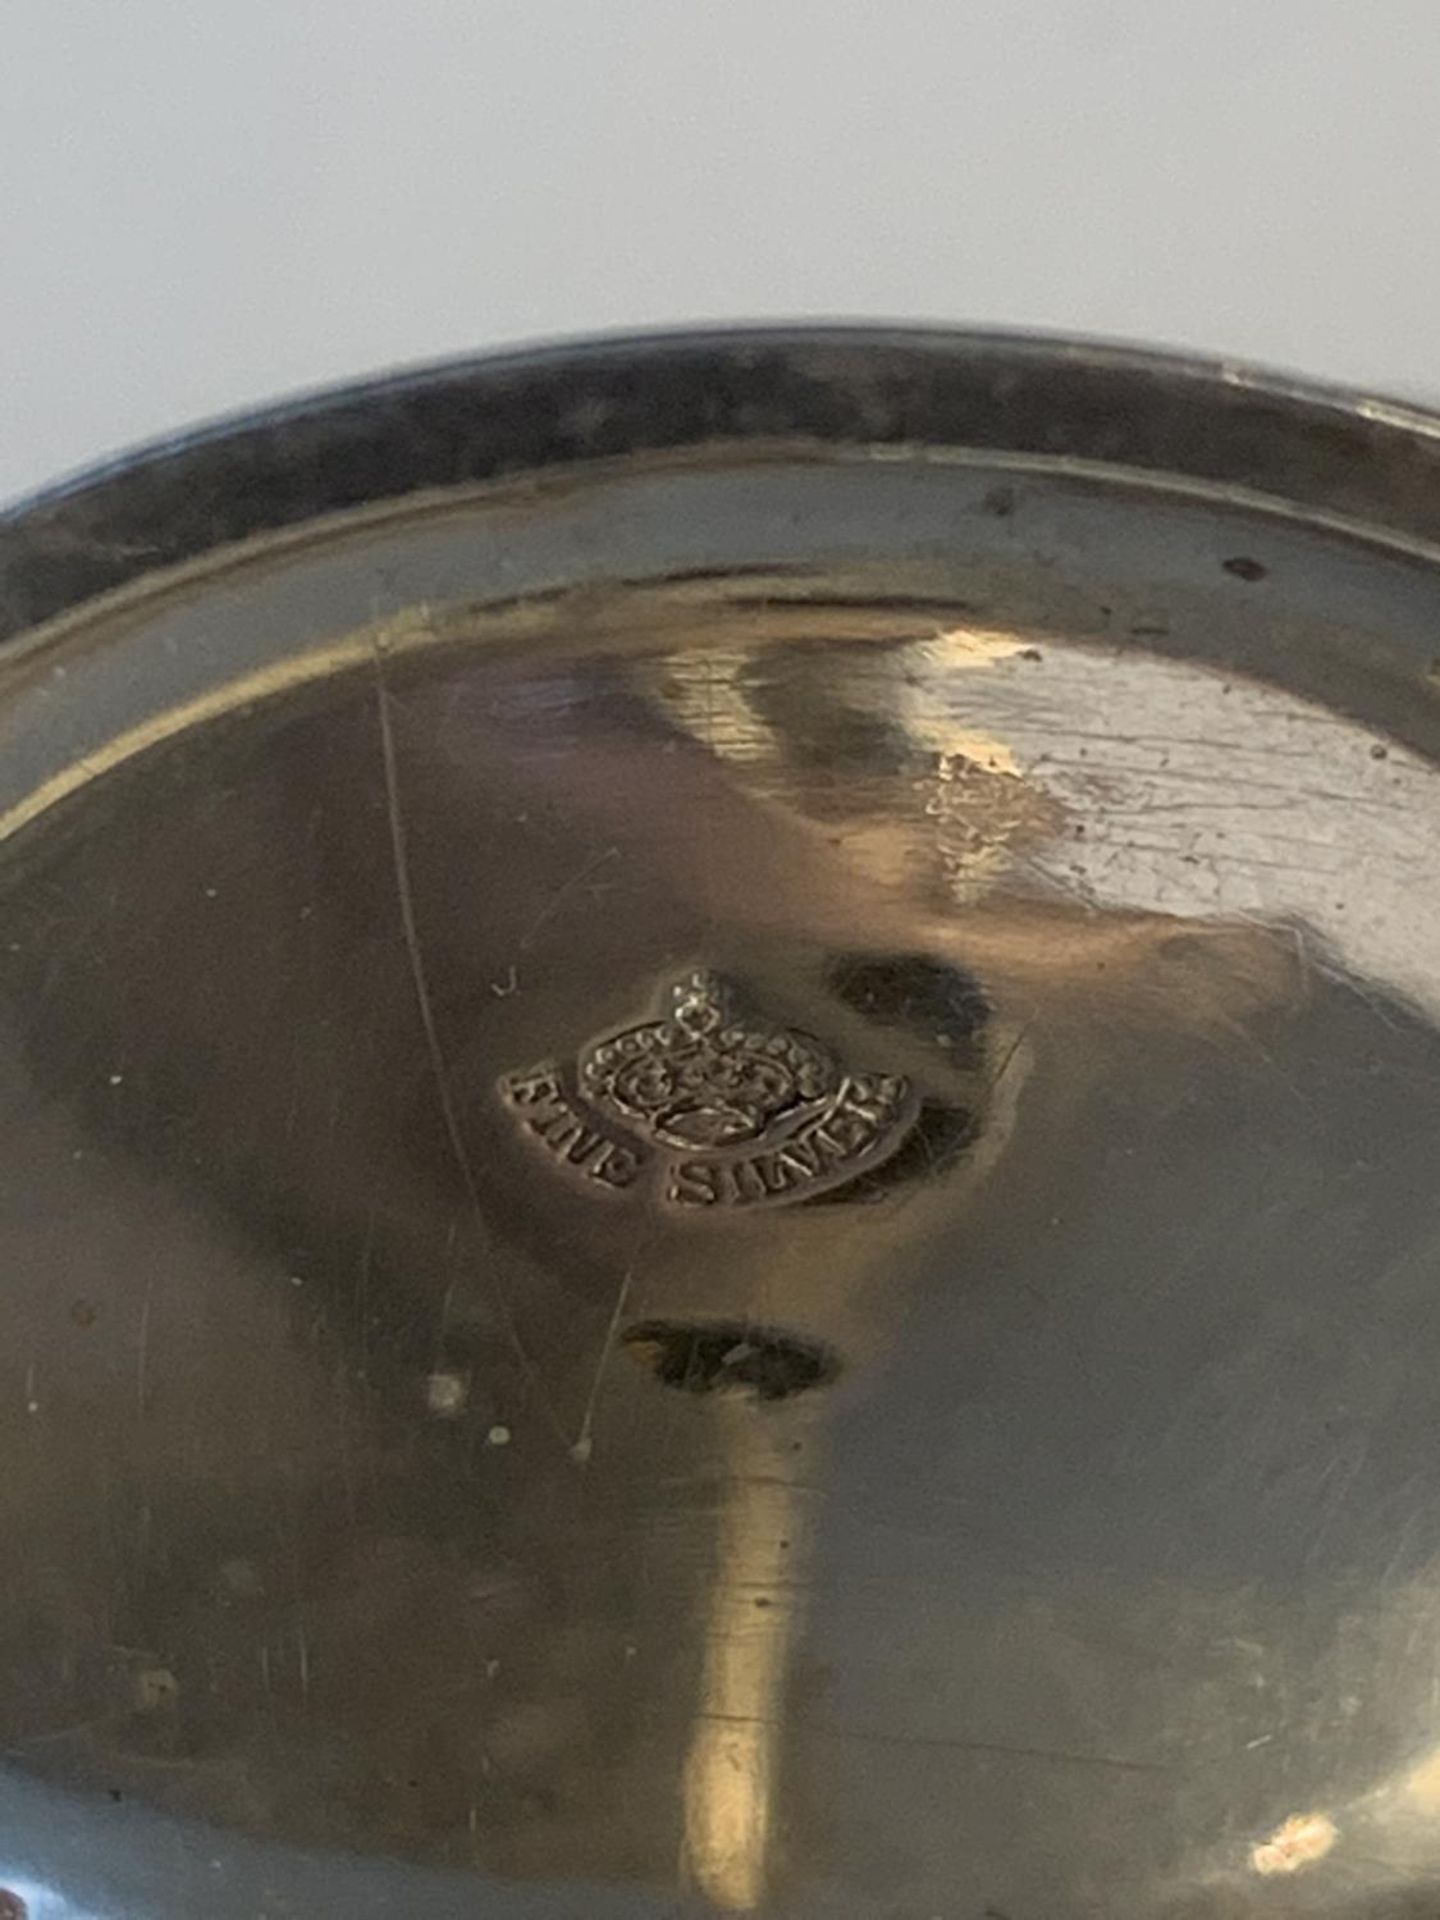 A MARKED FINE SILVER POCKET WATCH WITH DECORATIVE FACE AND A CHAIN - Image 4 of 6